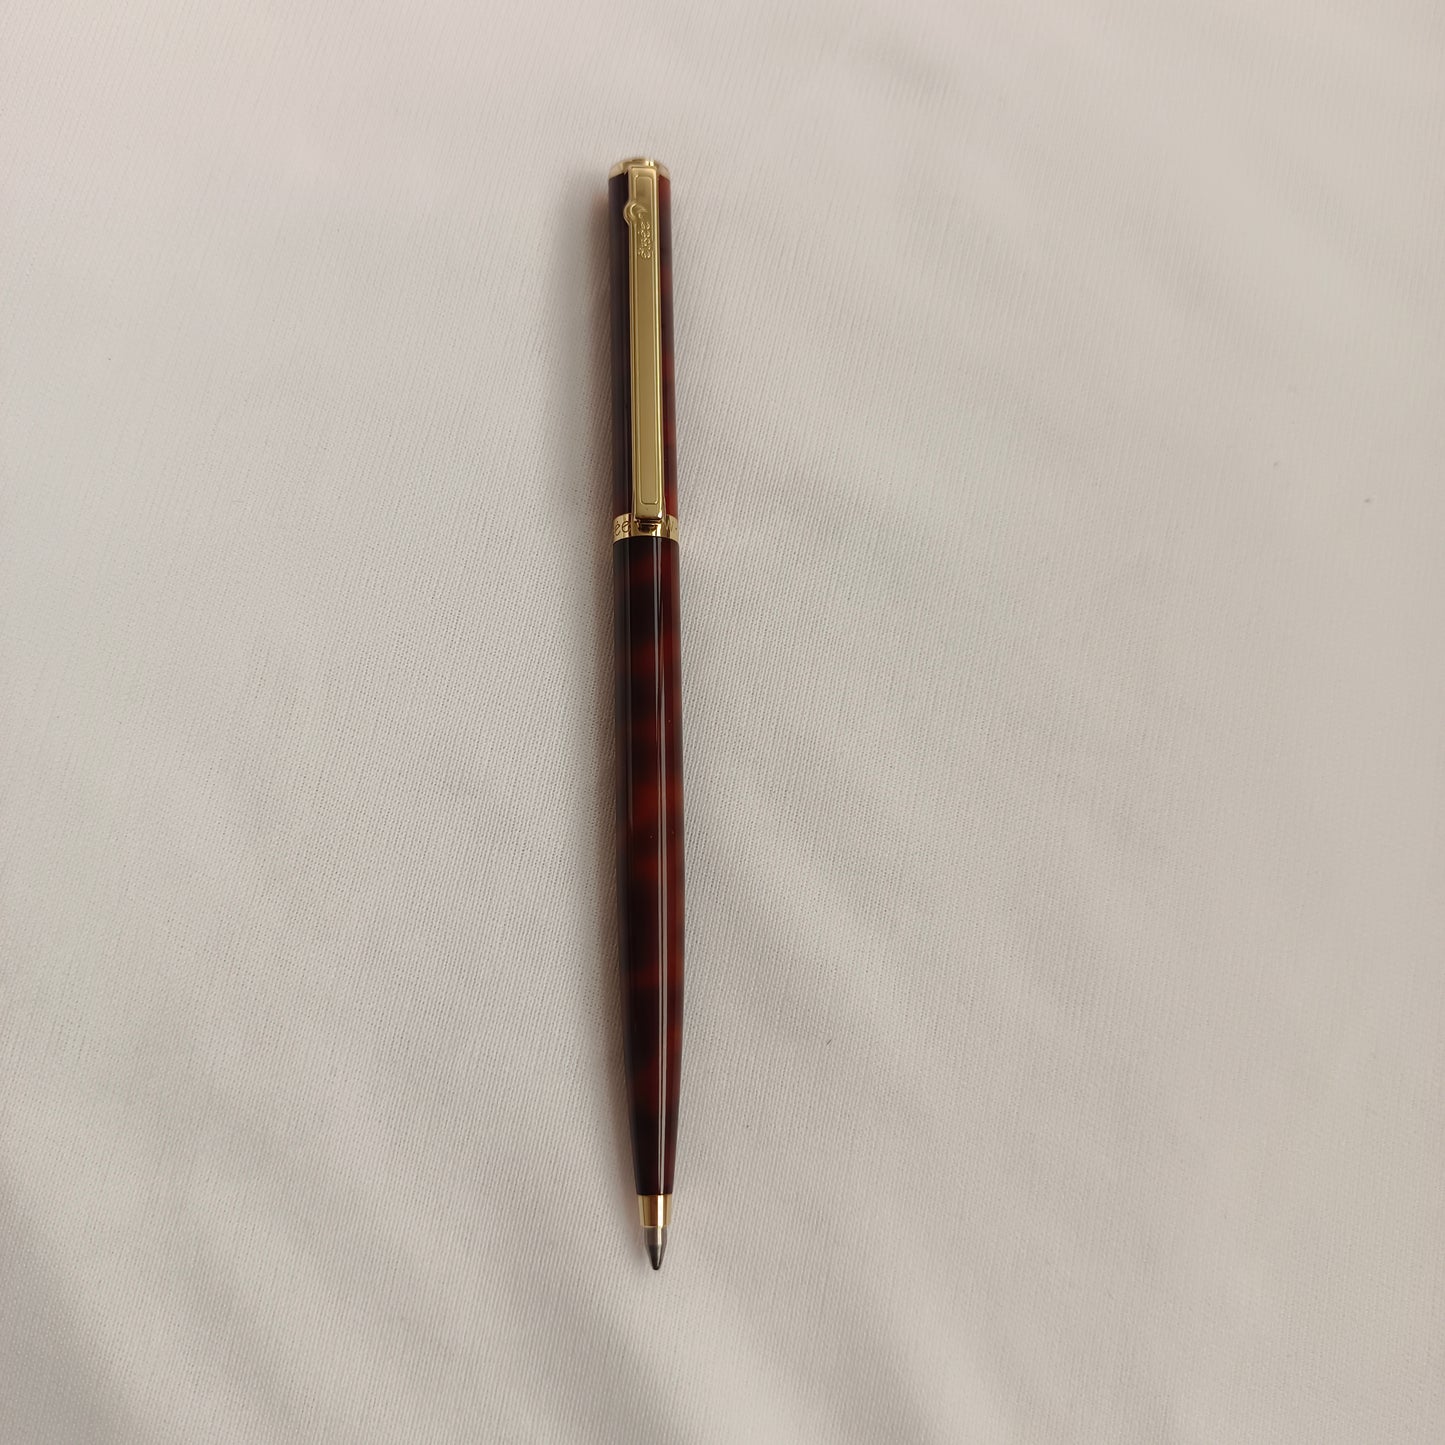 Elysee Classic / Classique Twist Ballpoint Pen in Red Marble